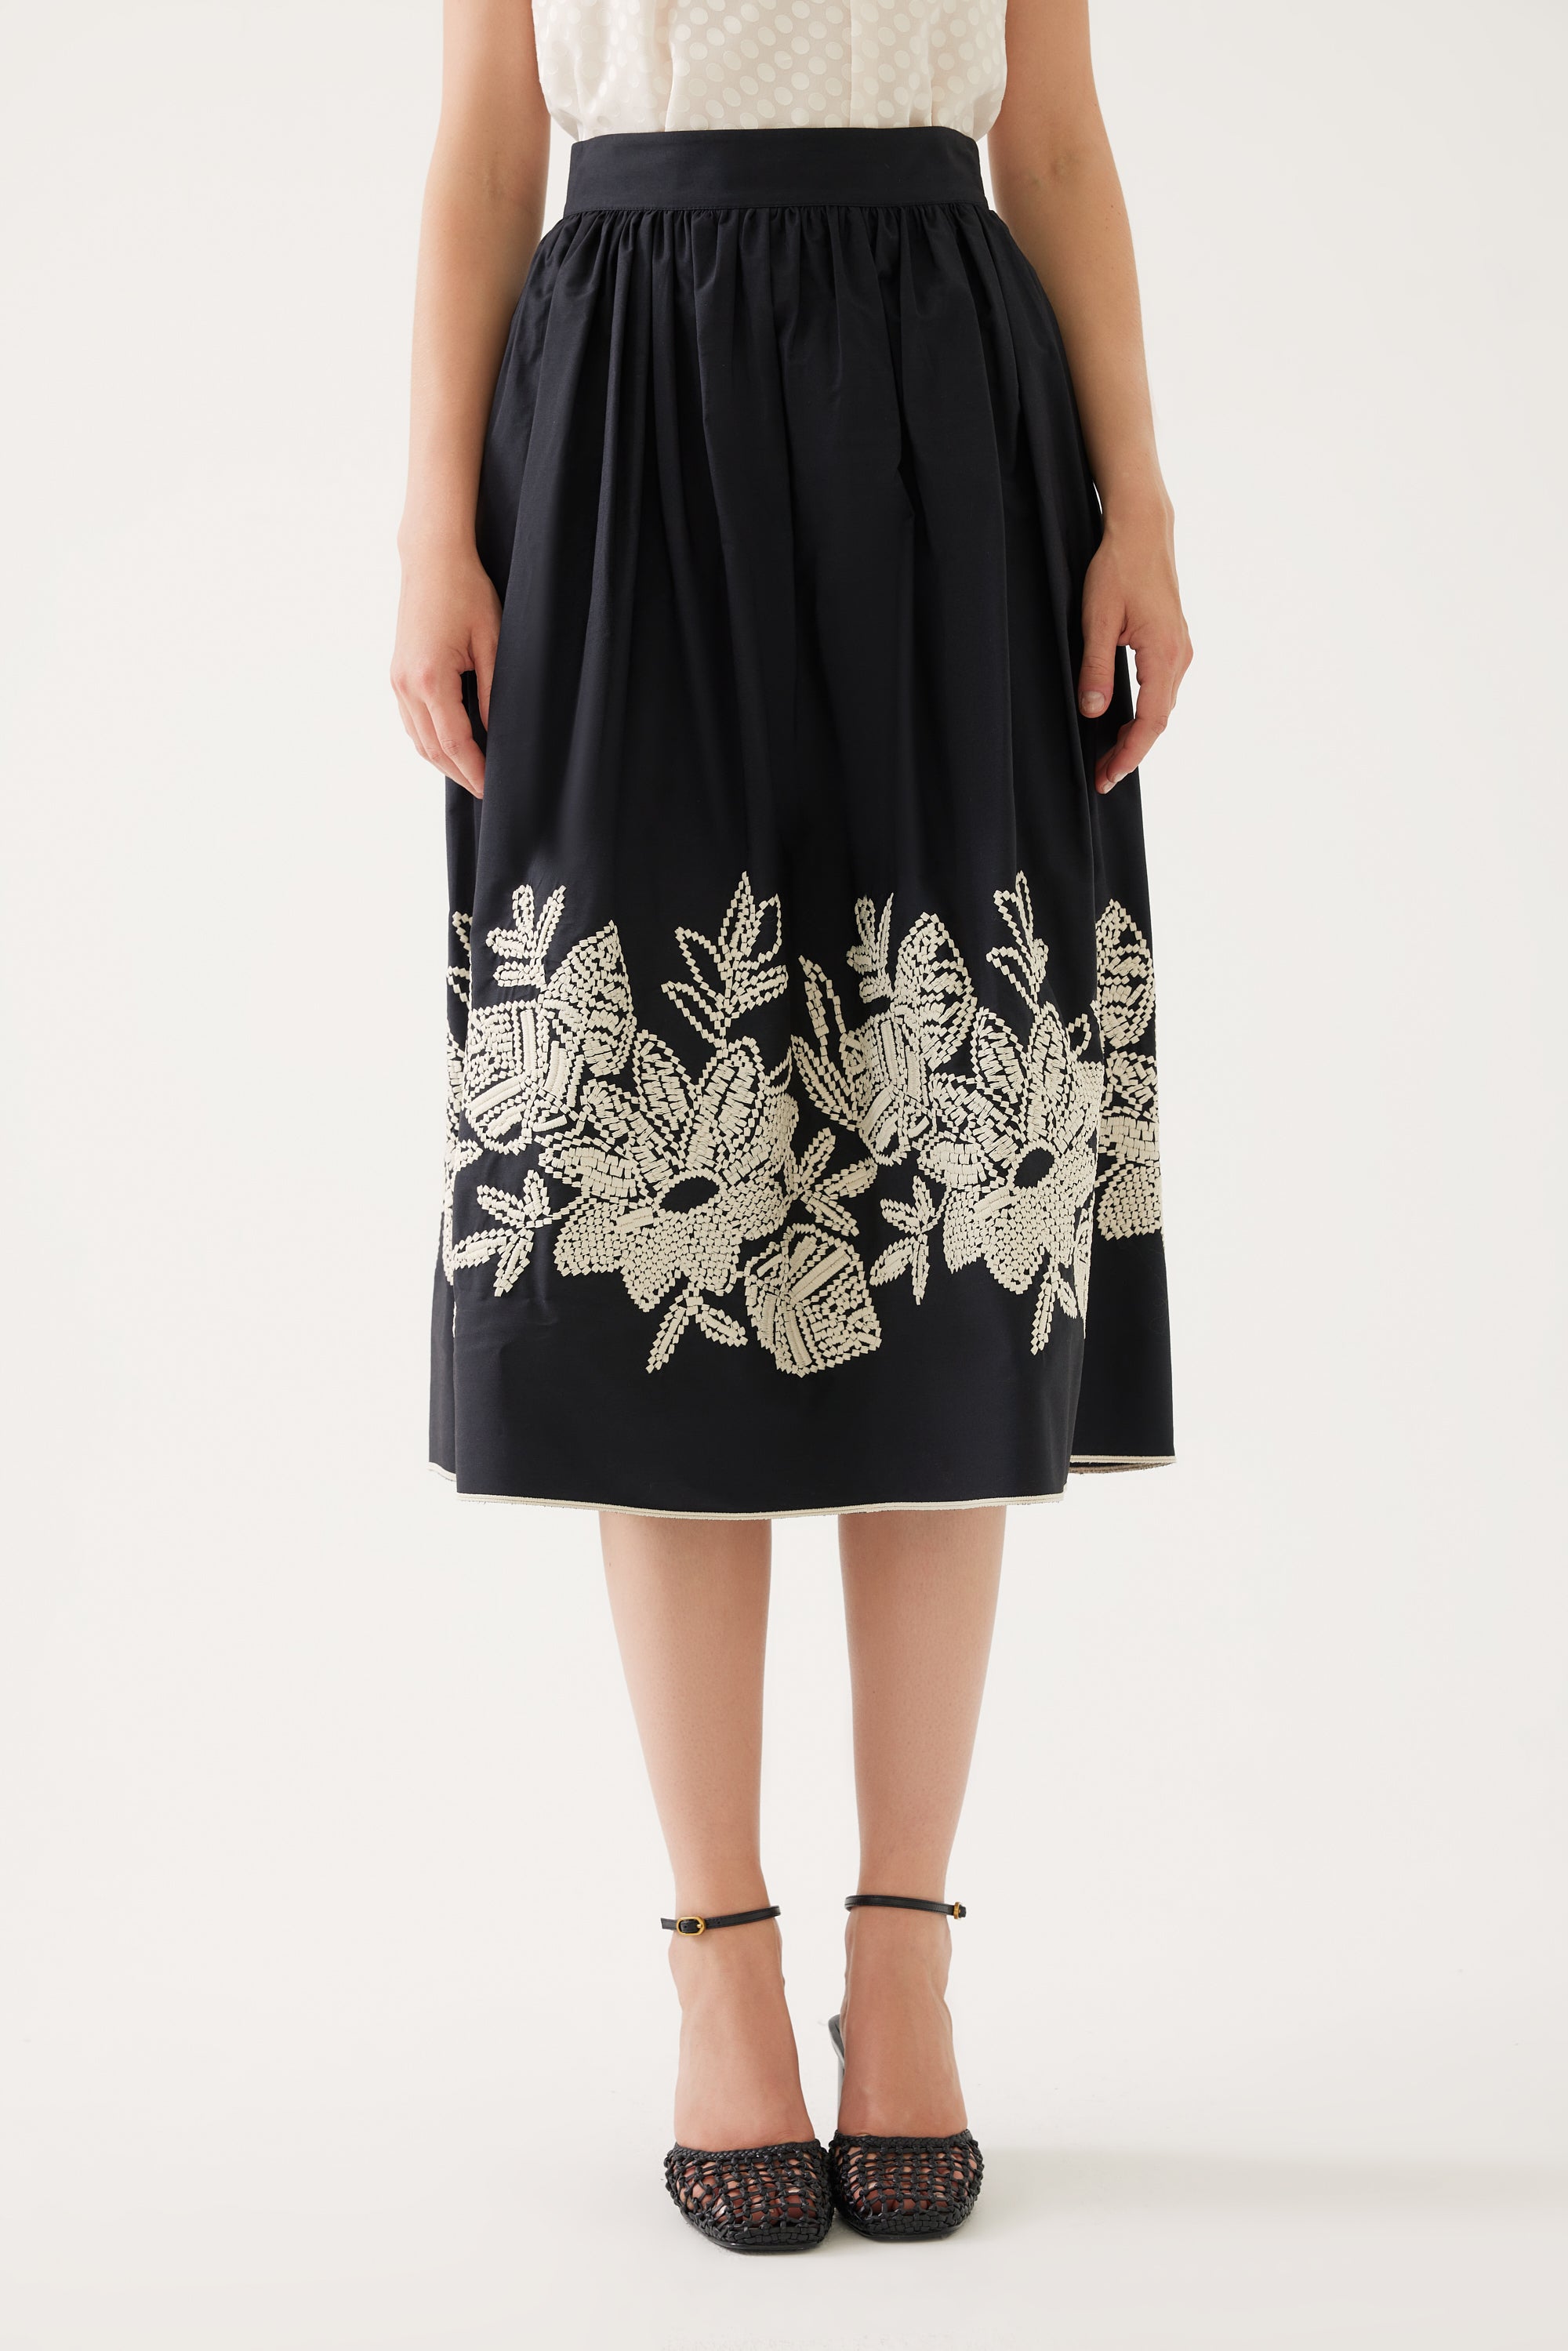 Exquise Black/Cream Embroidered Floral Midi Skirt 